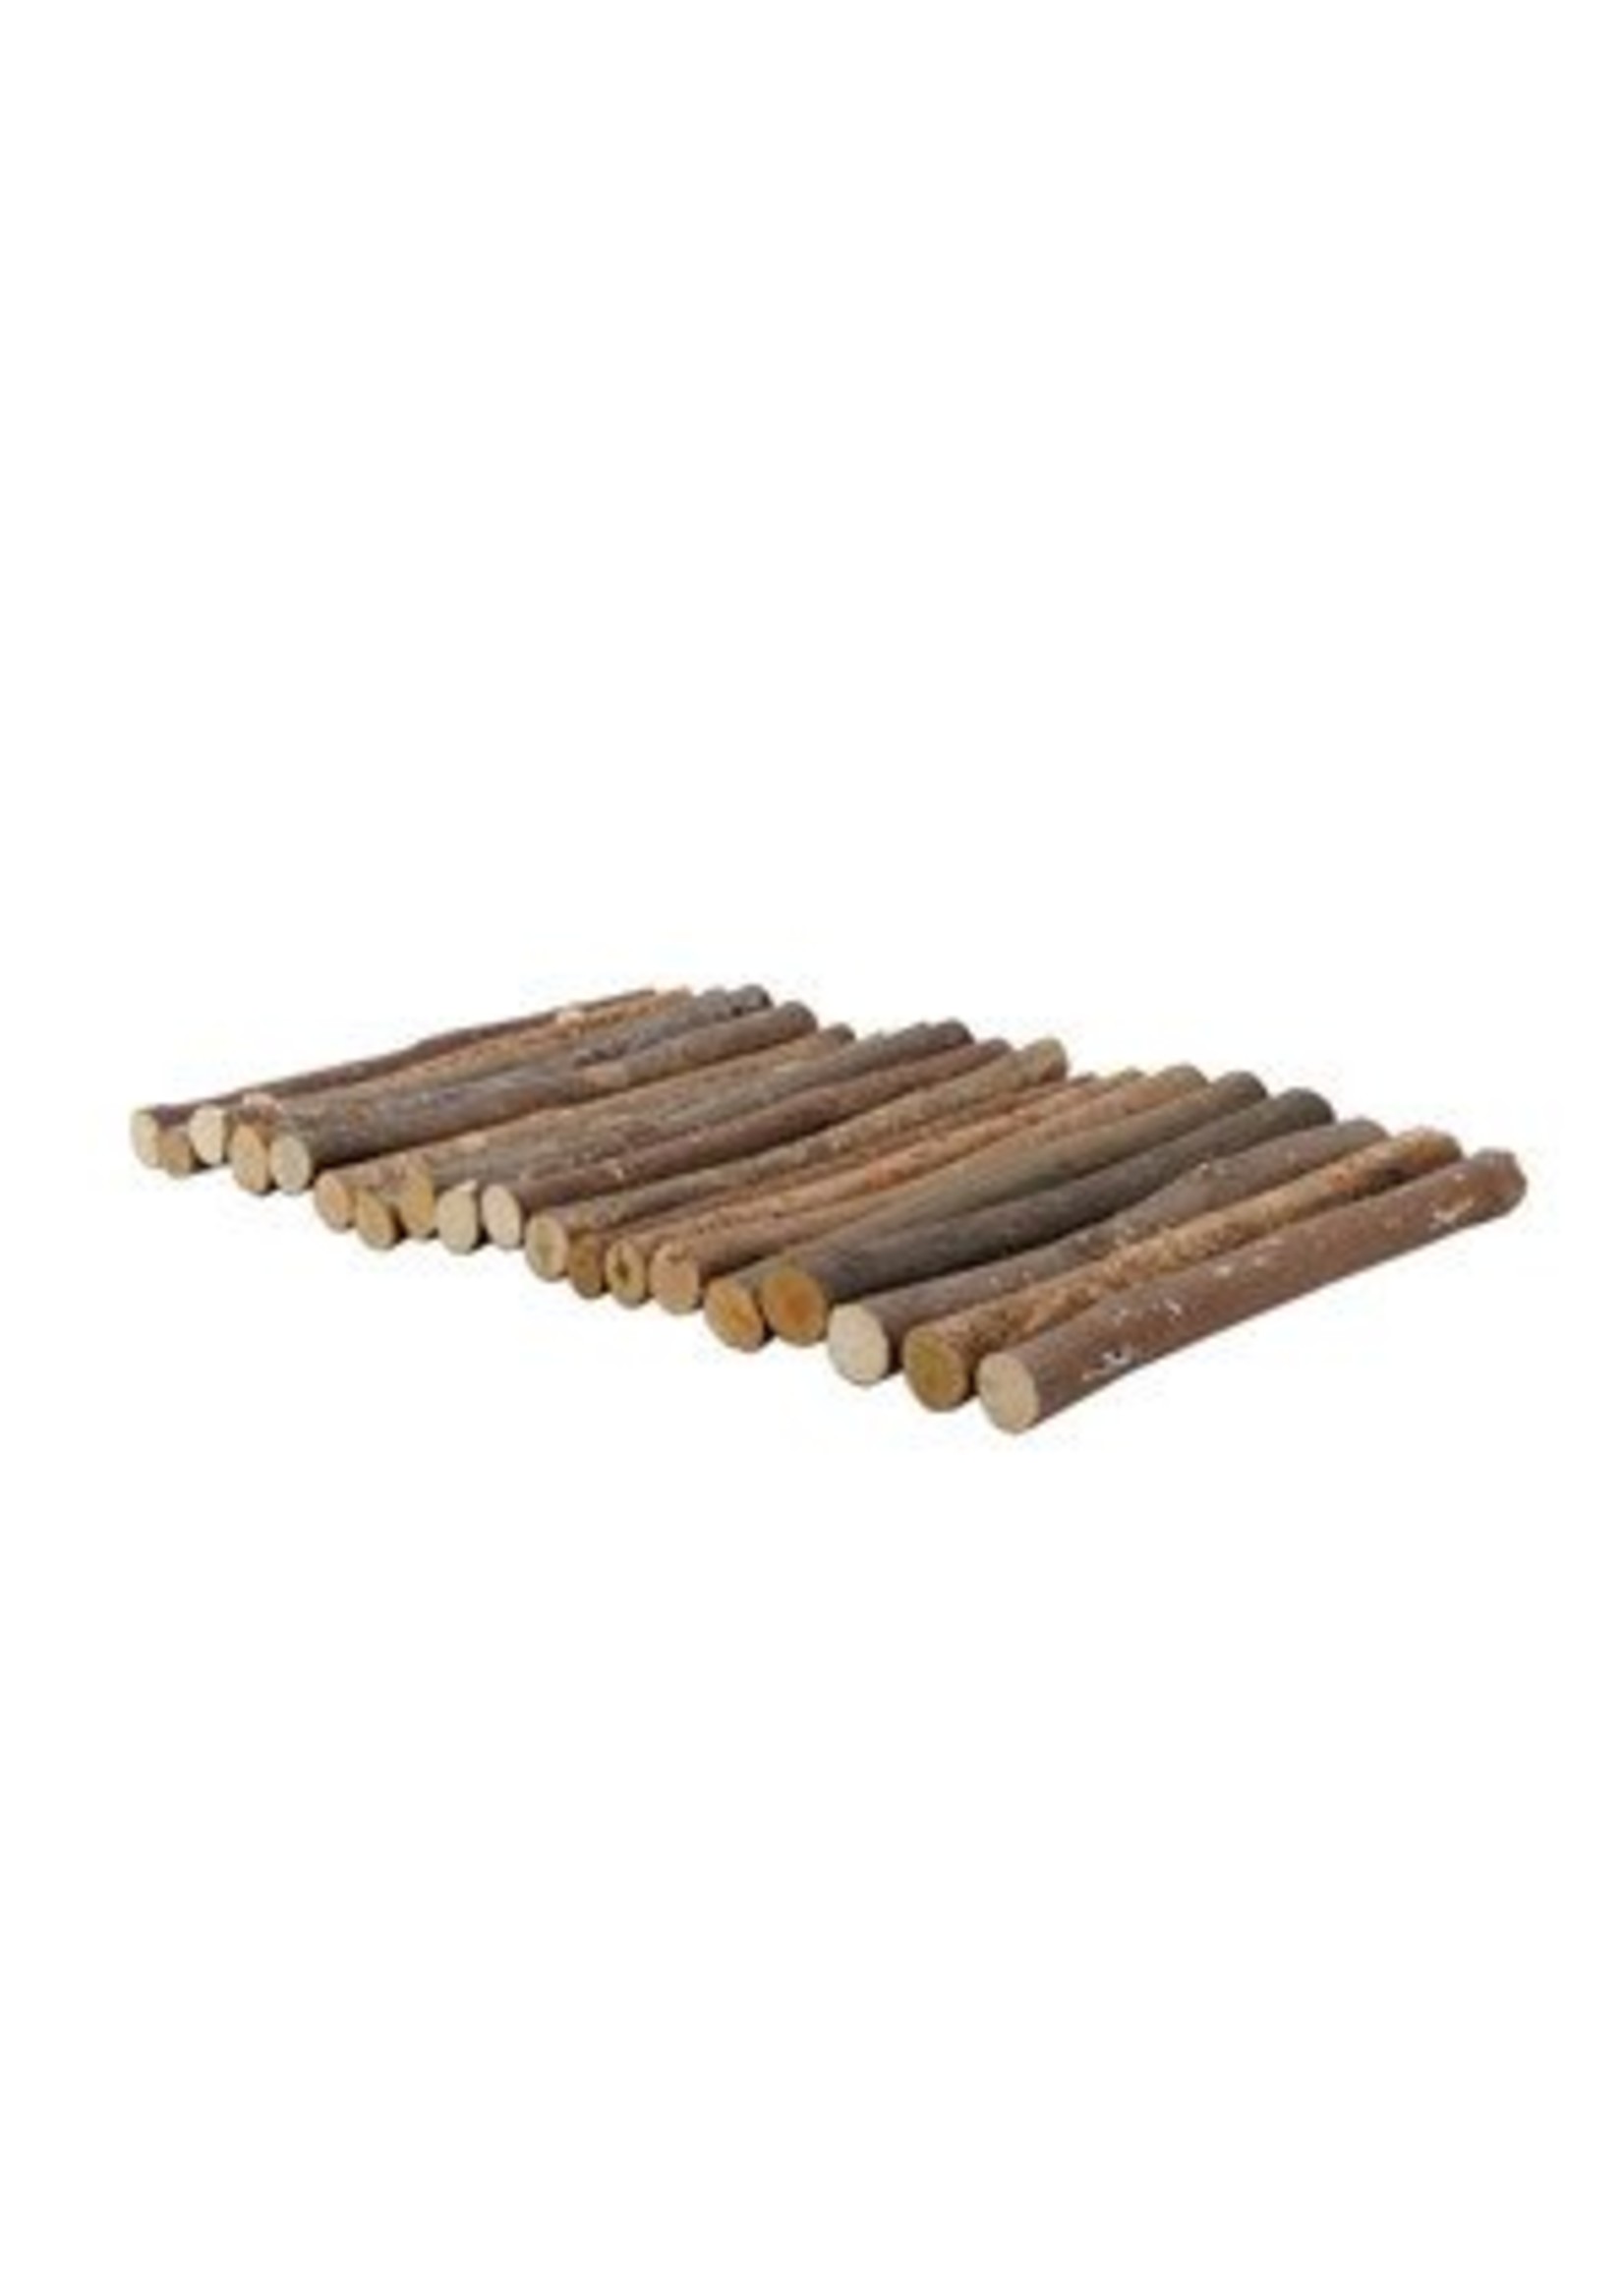 Living World Living World TreeHouse Real Wood Logs - Small Our Part #: 61405